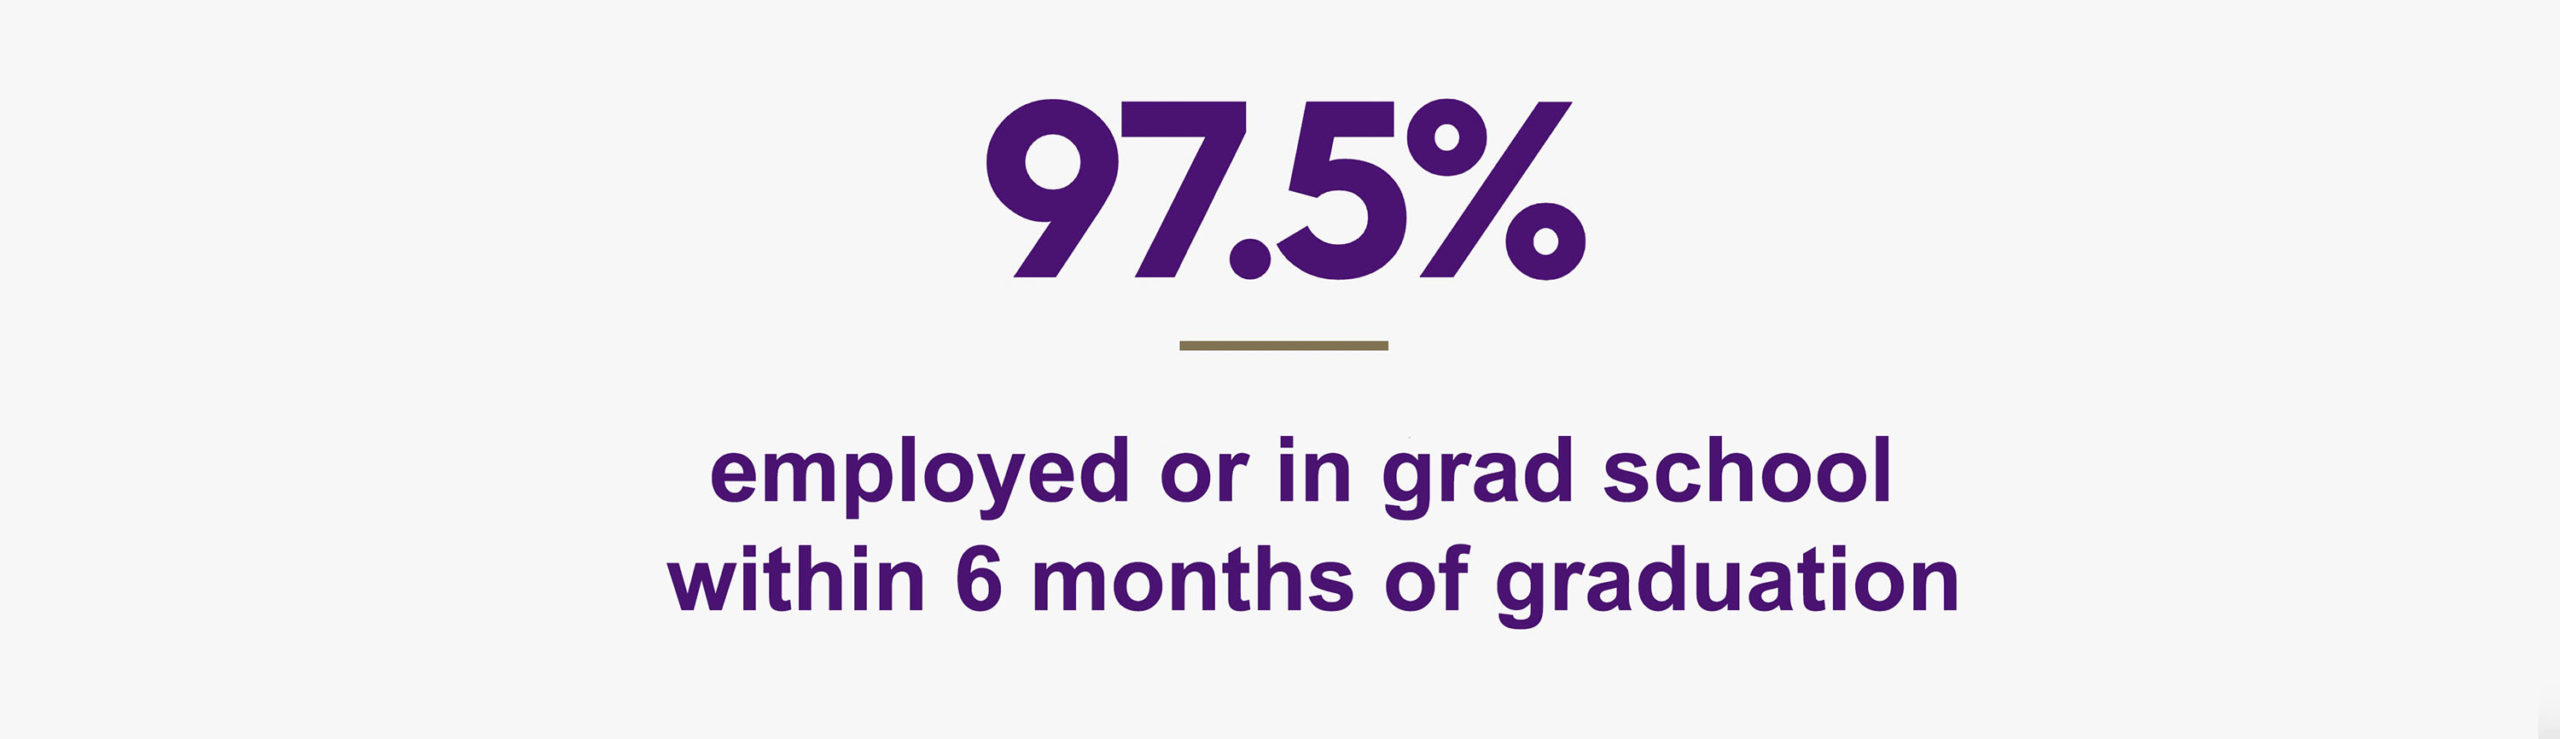 97.5% employed or in grad school within 6 months of graduation